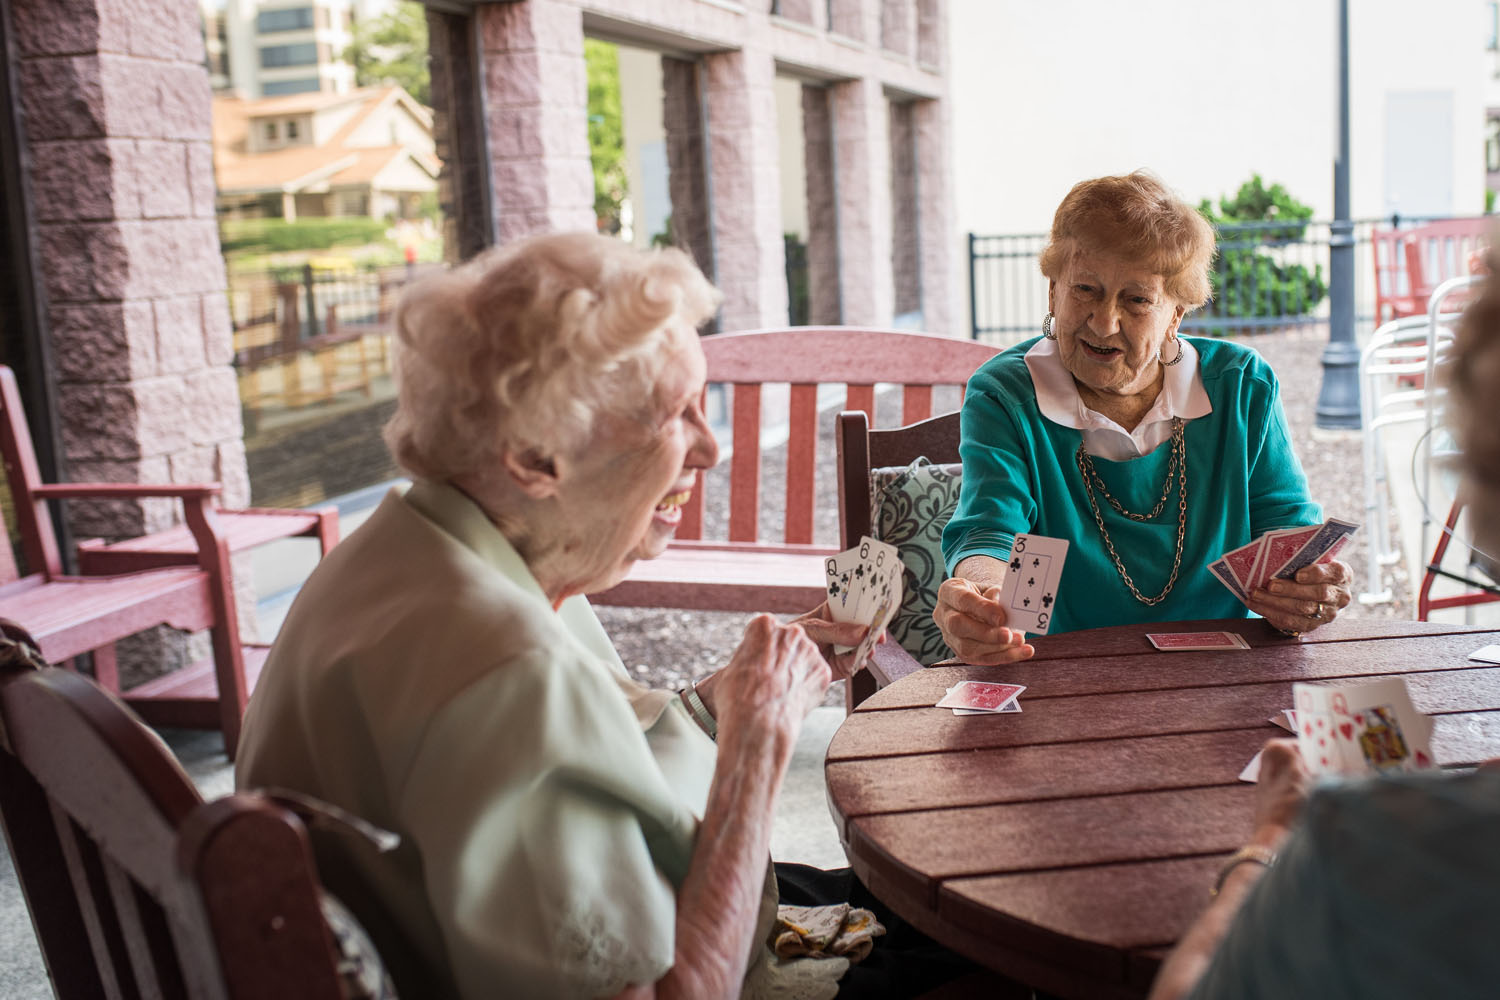 The Terrace at Eddy Memorial residents playing cards